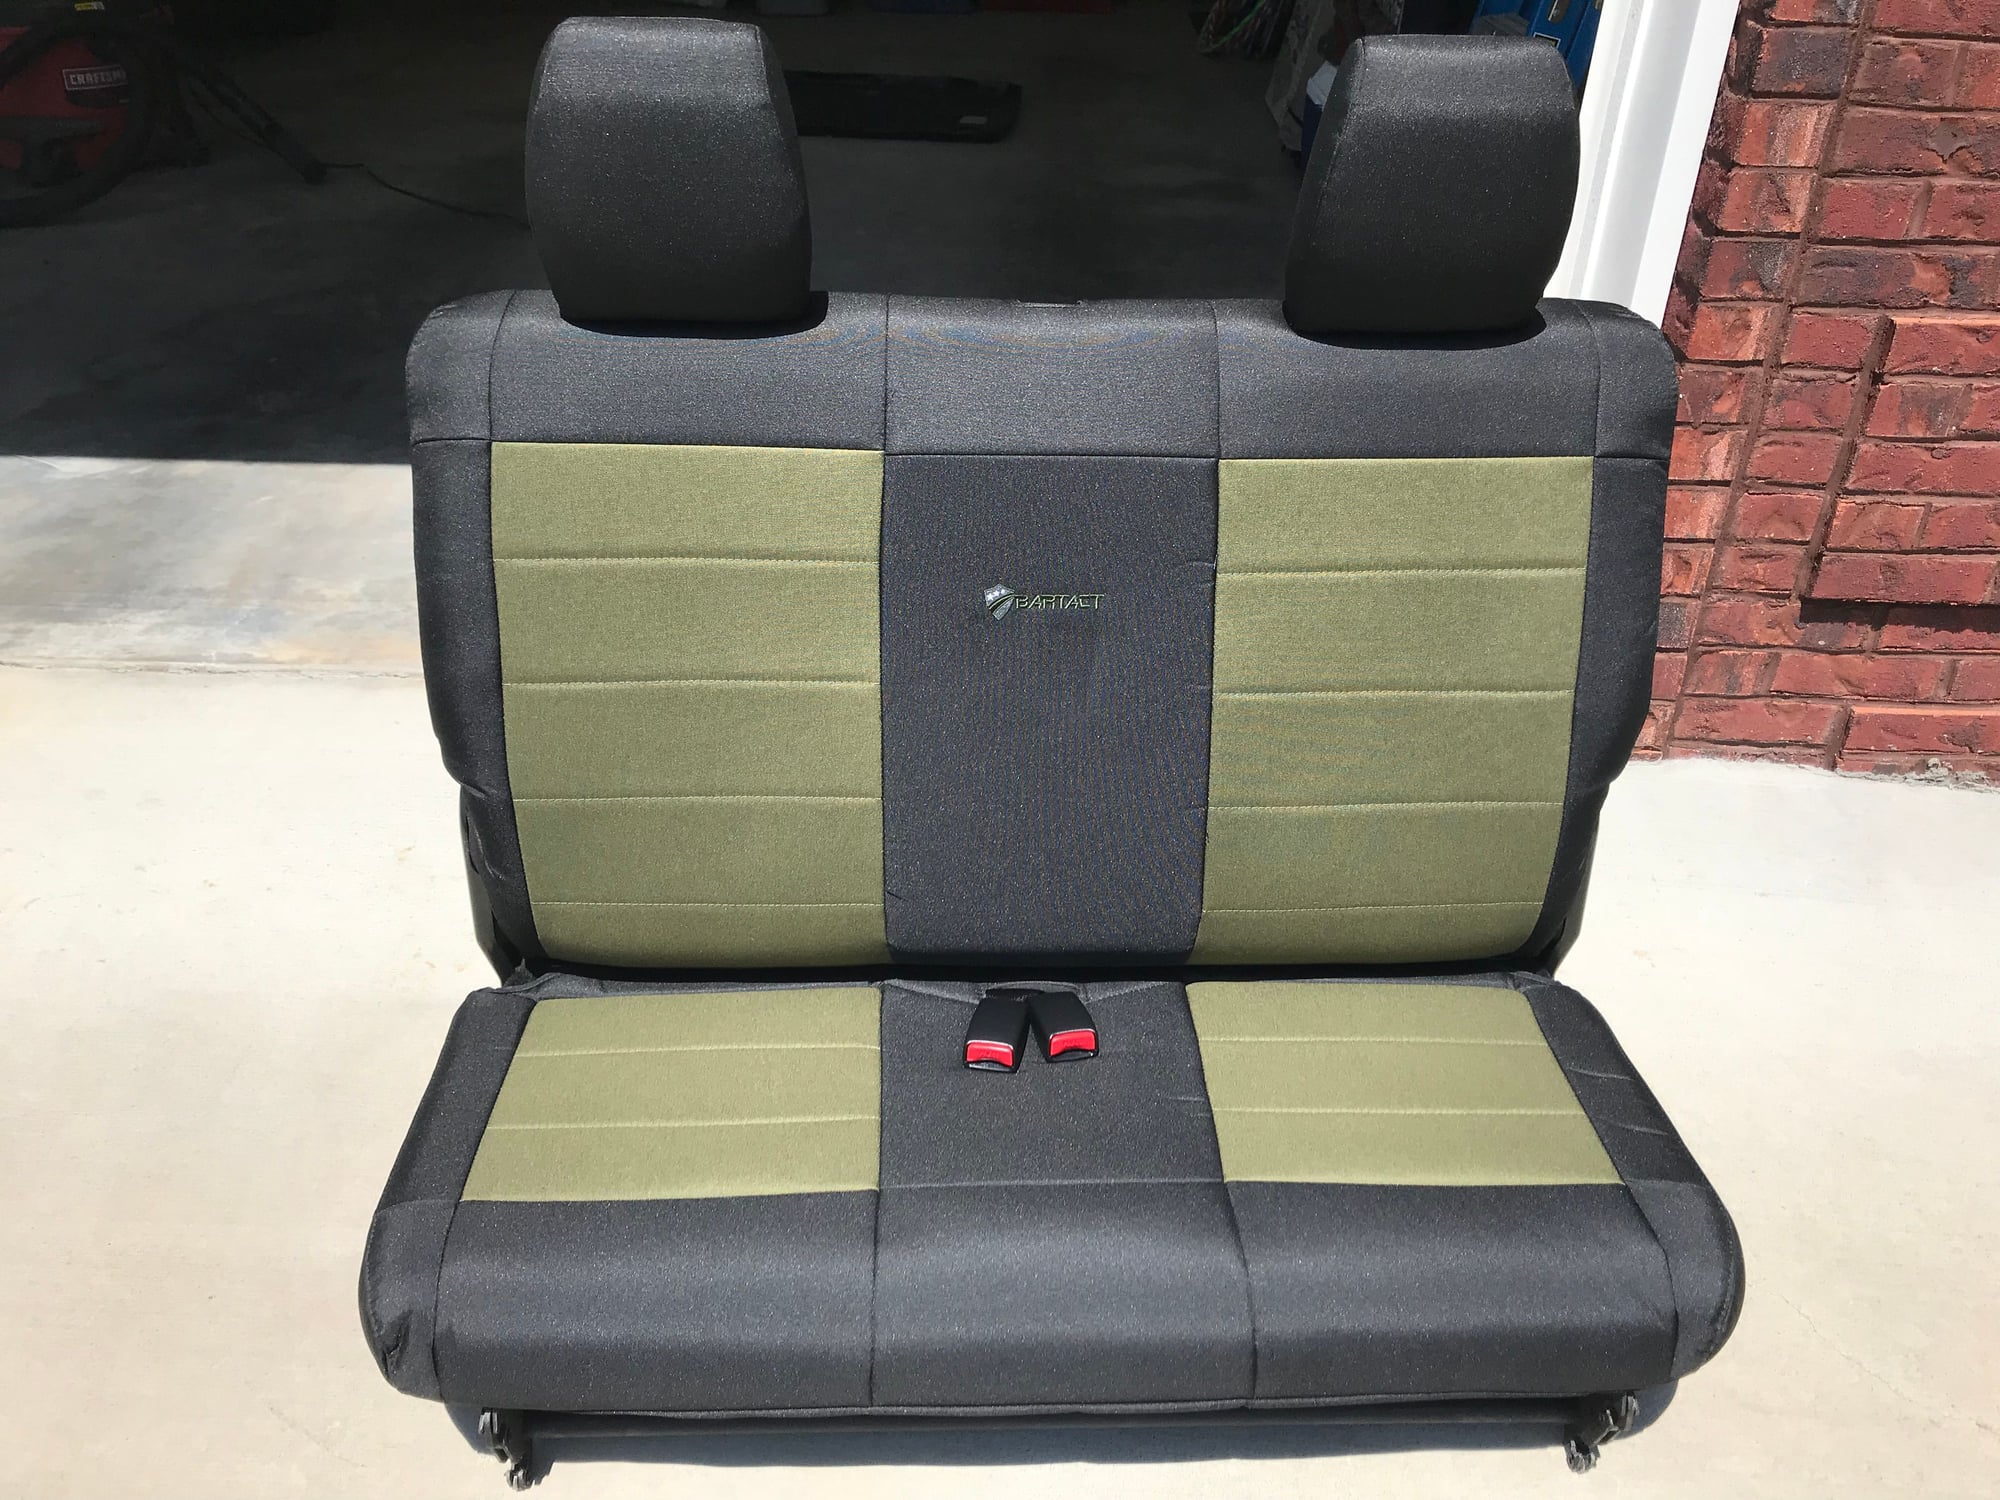 Miscellaneous - Traded in My Rubicon 2 door-Lots of stuff in my garage (East Tn) - Used - 2007 to 2018 Jeep Wrangler - Newport, TN 37821, United States